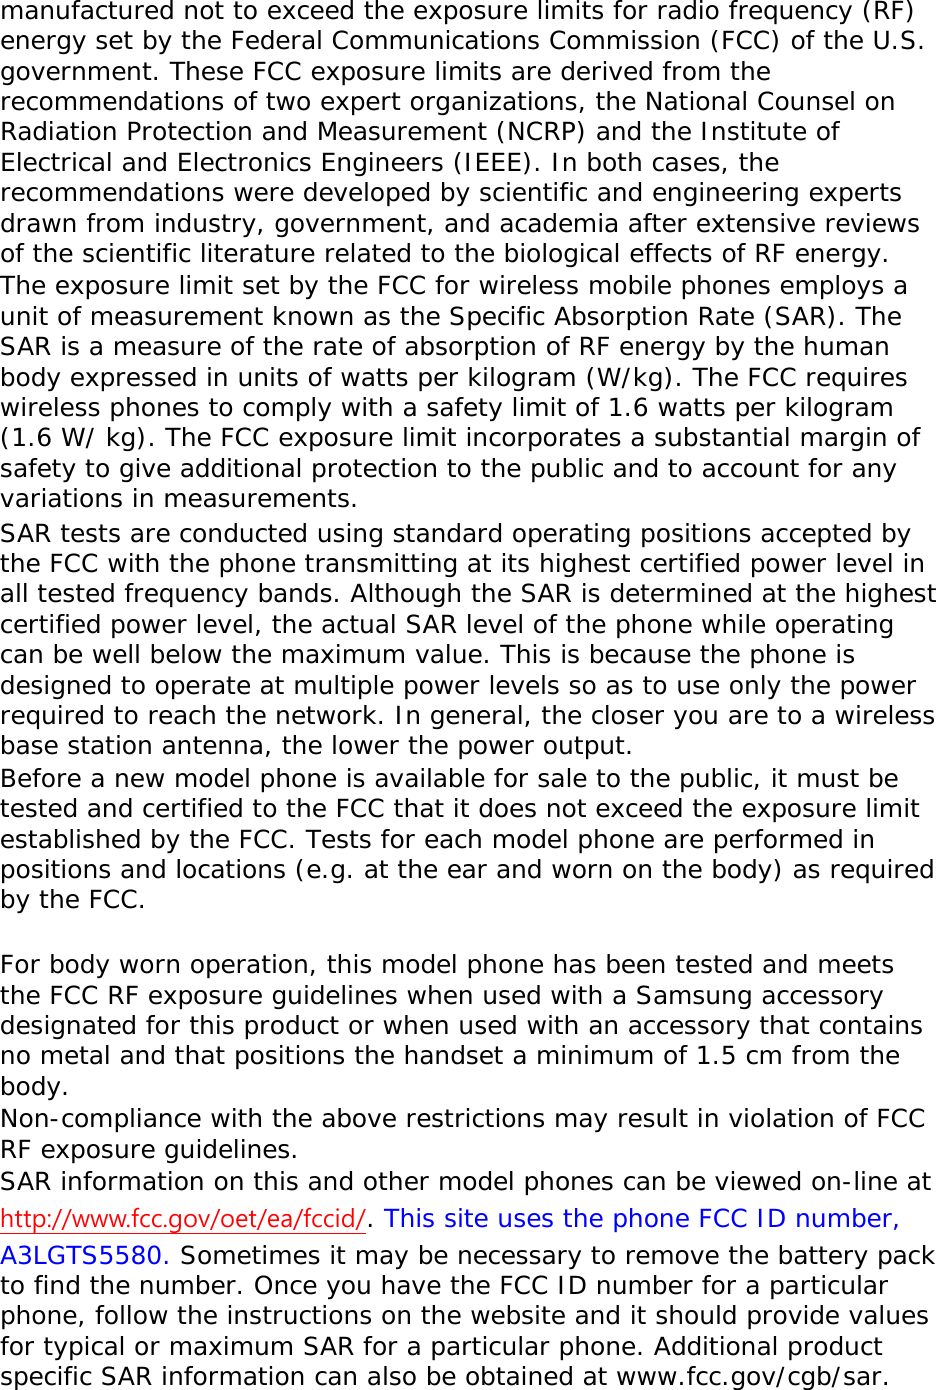 manufactured not to exceed the exposure limits for radio frequency (RF) energy set by the Federal Communications Commission (FCC) of the U.S. government. These FCC exposure limits are derived from the recommendations of two expert organizations, the National Counsel on Radiation Protection and Measurement (NCRP) and the Institute of Electrical and Electronics Engineers (IEEE). In both cases, the recommendations were developed by scientific and engineering experts drawn from industry, government, and academia after extensive reviews of the scientific literature related to the biological effects of RF energy. The exposure limit set by the FCC for wireless mobile phones employs a unit of measurement known as the Specific Absorption Rate (SAR). The SAR is a measure of the rate of absorption of RF energy by the human body expressed in units of watts per kilogram (W/kg). The FCC requires wireless phones to comply with a safety limit of 1.6 watts per kilogram (1.6 W/ kg). The FCC exposure limit incorporates a substantial margin of safety to give additional protection to the public and to account for any variations in measurements. SAR tests are conducted using standard operating positions accepted by the FCC with the phone transmitting at its highest certified power level in all tested frequency bands. Although the SAR is determined at the highest certified power level, the actual SAR level of the phone while operating can be well below the maximum value. This is because the phone is designed to operate at multiple power levels so as to use only the power required to reach the network. In general, the closer you are to a wireless base station antenna, the lower the power output. Before a new model phone is available for sale to the public, it must be tested and certified to the FCC that it does not exceed the exposure limit established by the FCC. Tests for each model phone are performed in positions and locations (e.g. at the ear and worn on the body) as required by the FCC.    For body worn operation, this model phone has been tested and meets the FCC RF exposure guidelines when used with a Samsung accessory designated for this product or when used with an accessory that contains no metal and that positions the handset a minimum of 1.5 cm from the body.  Non-compliance with the above restrictions may result in violation of FCC RF exposure guidelines. SAR information on this and other model phones can be viewed on-line at http://www.fcc.gov/oet/ea/fccid/. This site uses the phone FCC ID number, A3LGTS5580. Sometimes it may be necessary to remove the battery pack to find the number. Once you have the FCC ID number for a particular phone, follow the instructions on the website and it should provide values for typical or maximum SAR for a particular phone. Additional product specific SAR information can also be obtained at www.fcc.gov/cgb/sar. 